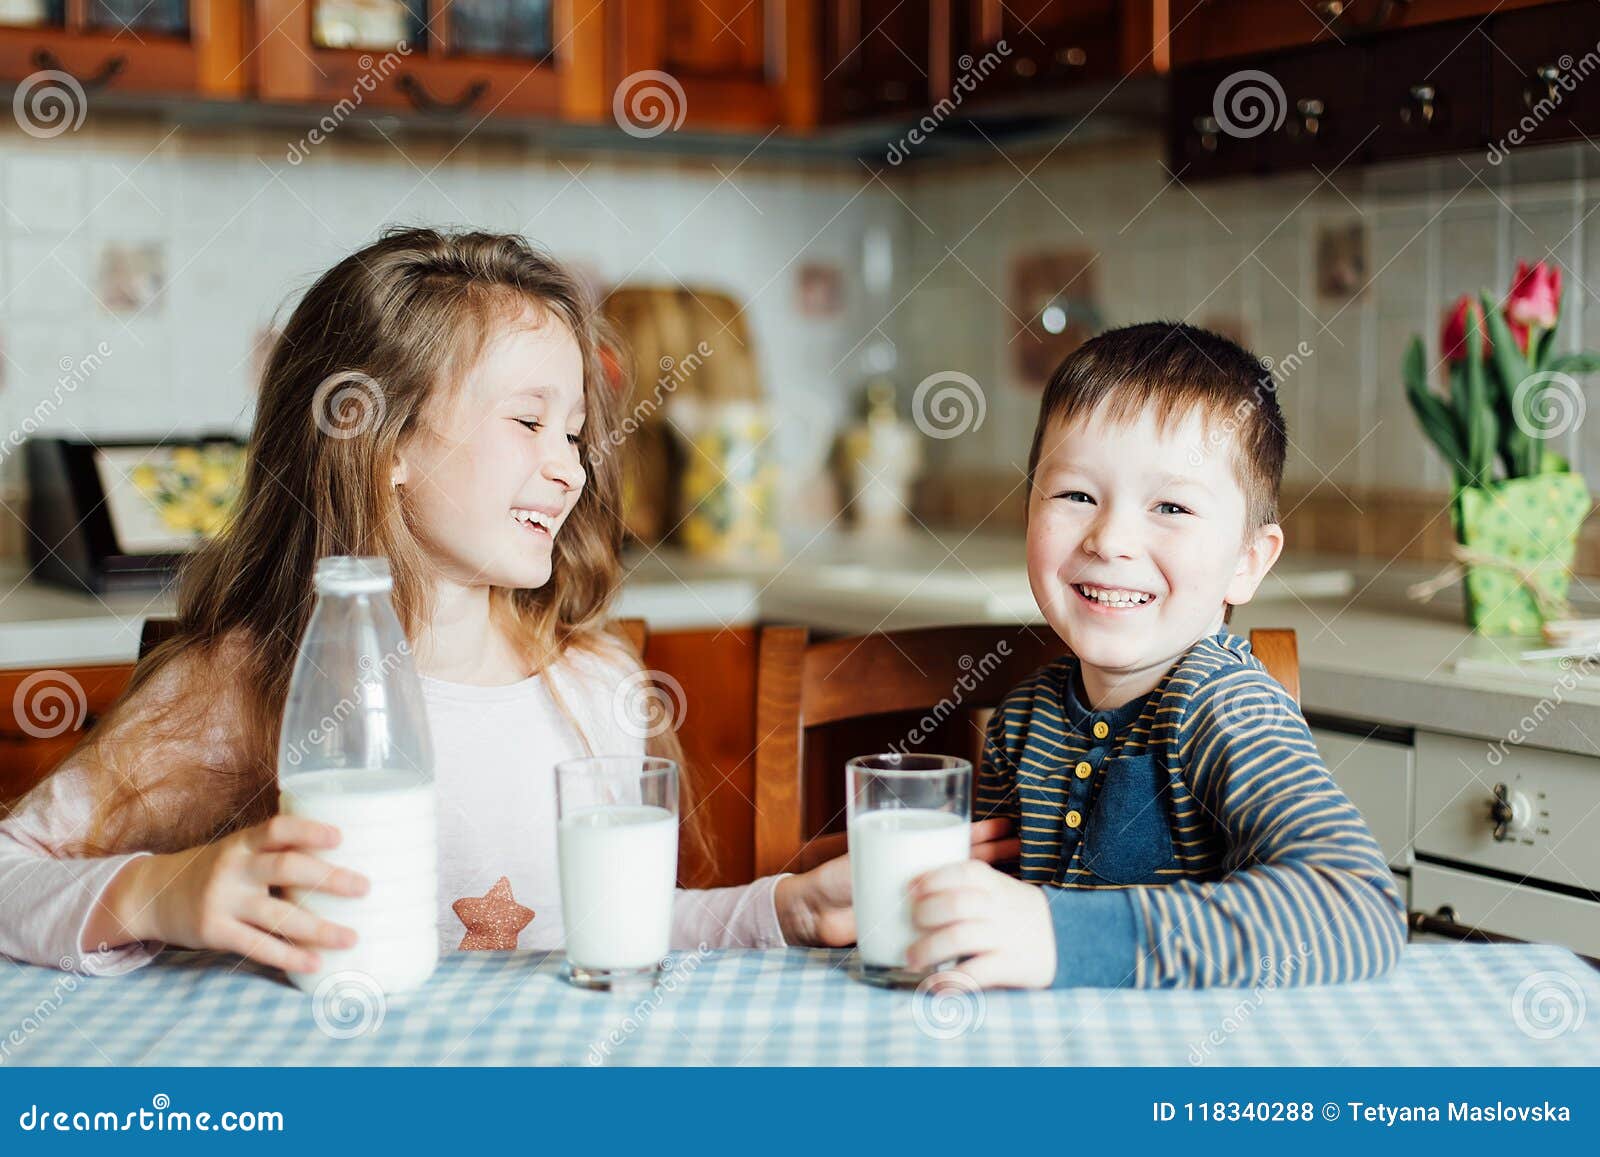 https://thumbs.dreamstime.com/z/children-drink-milk-have-fun-kitchen-morning-sister-brother-prepare-cocoa-children-drink-milk-have-fun-118340288.jpg